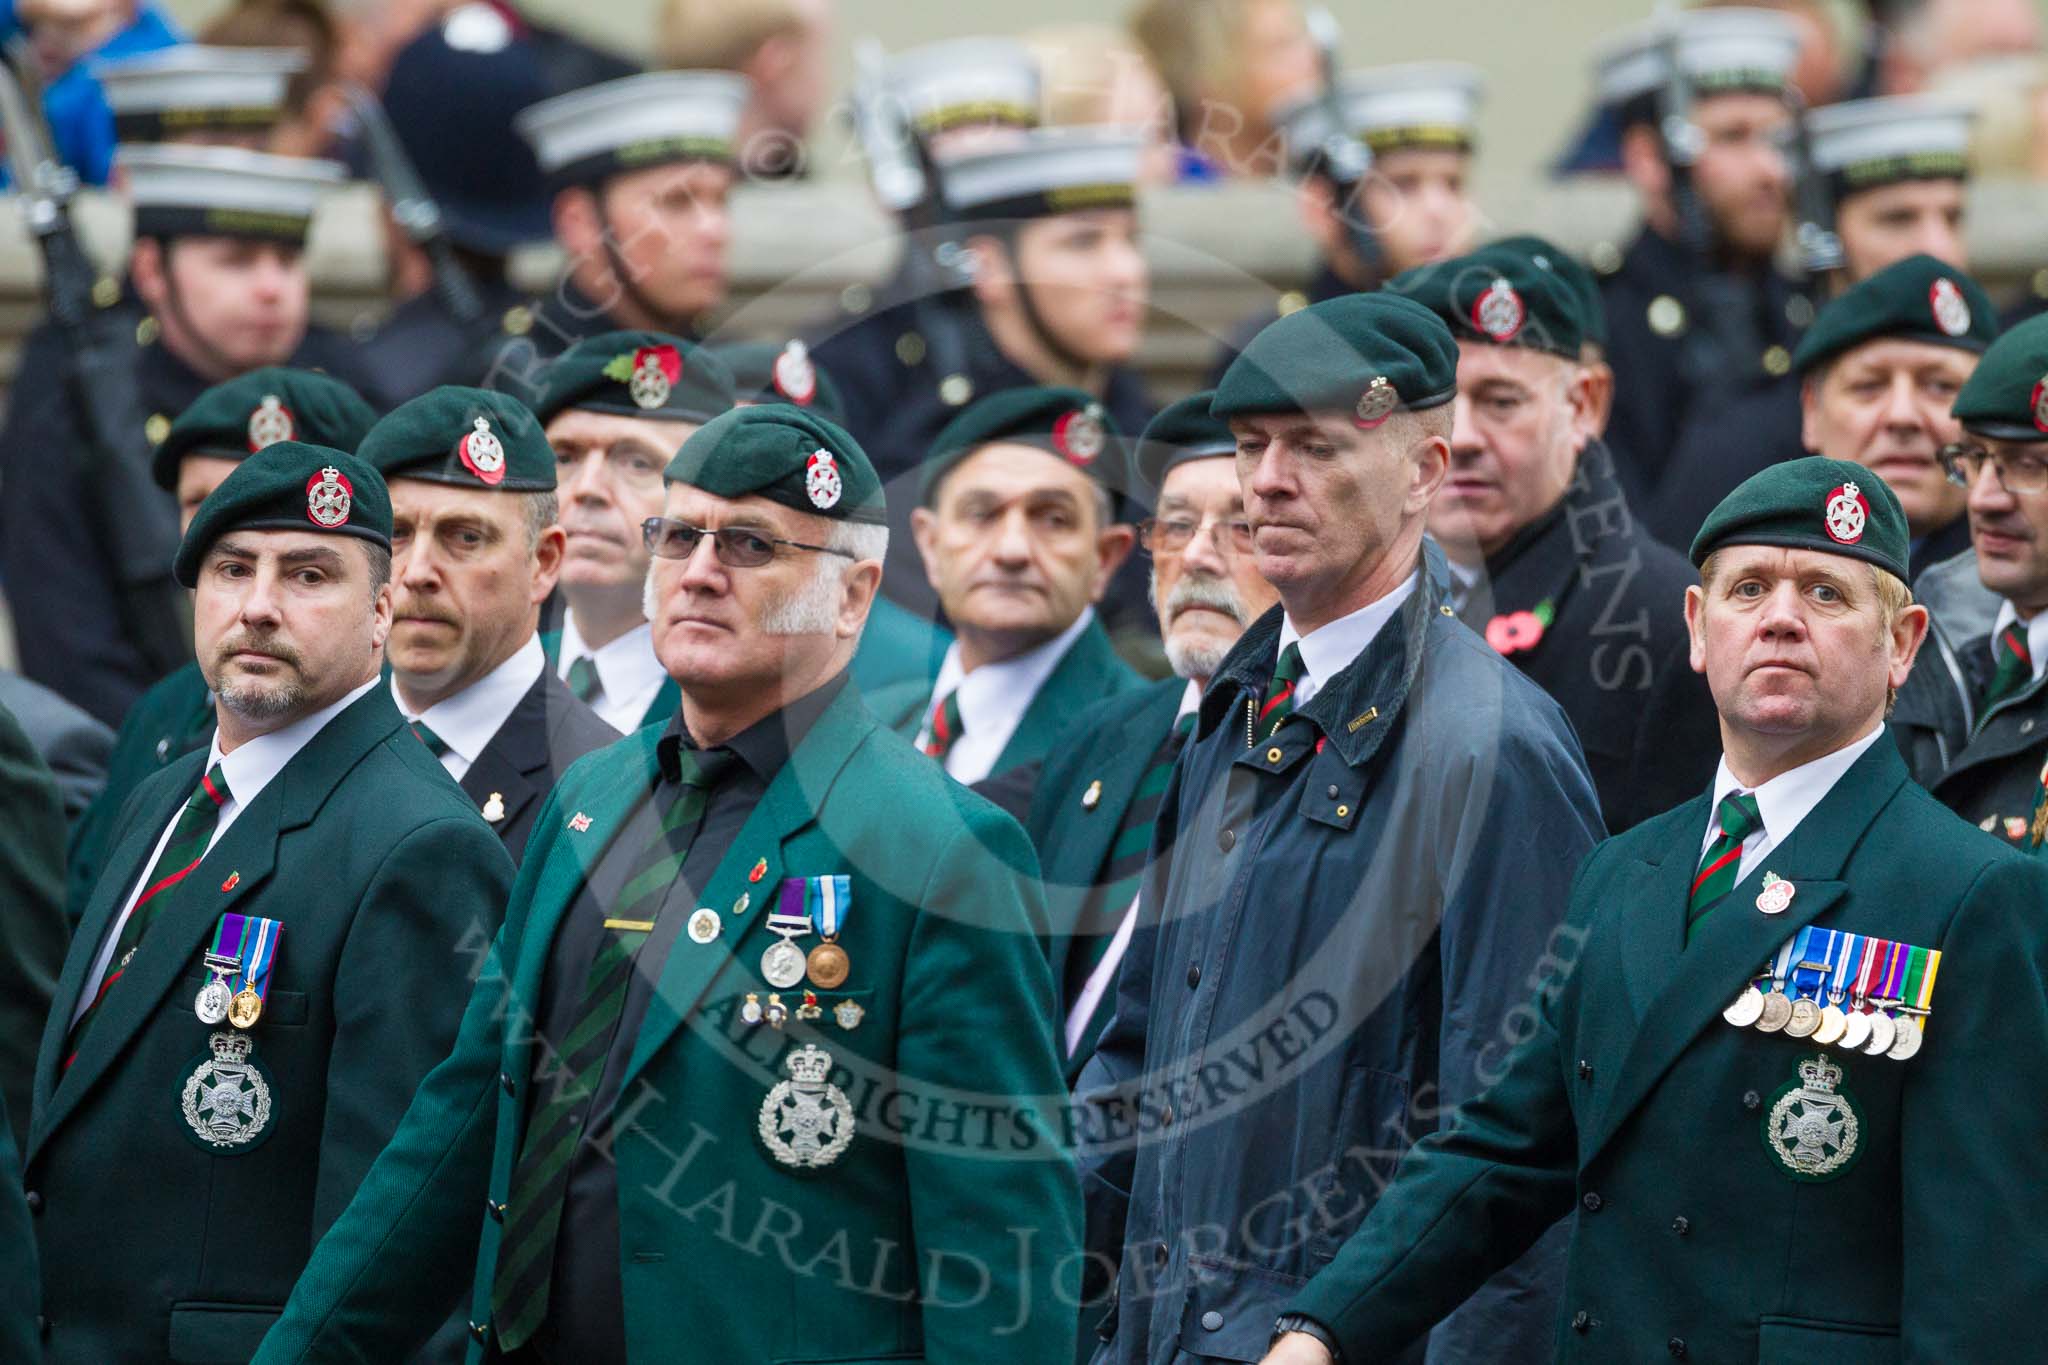 Remembrance Sunday at the Cenotaph 2015: Group A2, Royal Green Jackets Association.
Cenotaph, Whitehall, London SW1,
London,
Greater London,
United Kingdom,
on 08 November 2015 at 12:08, image #1176